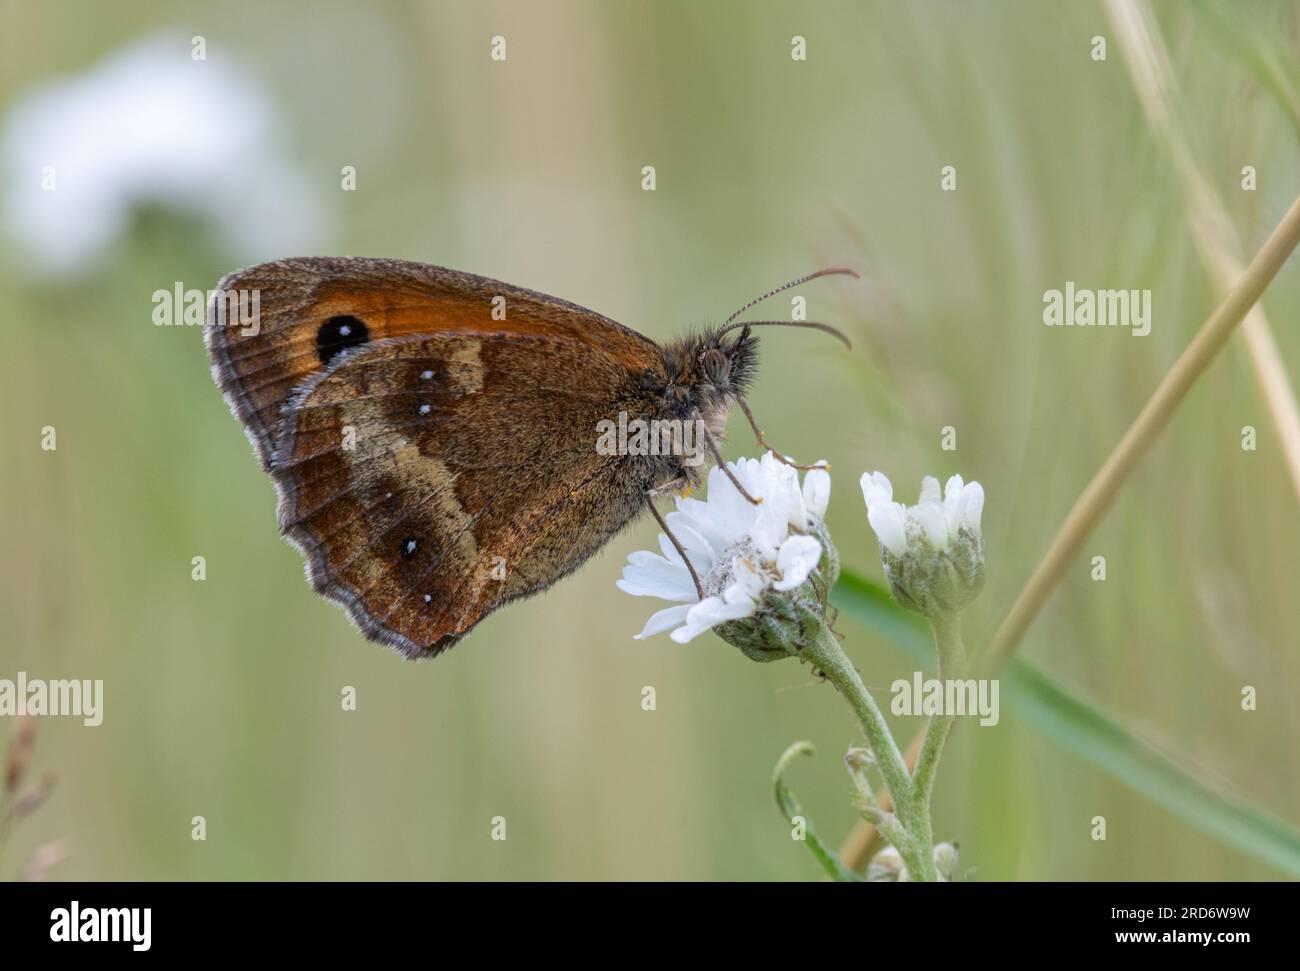 Gatekeeper butterfly (Pyronia tithonus), also called hedge brown, drinking nectar from wildflowers in summer or July, England, UK Stock Photo